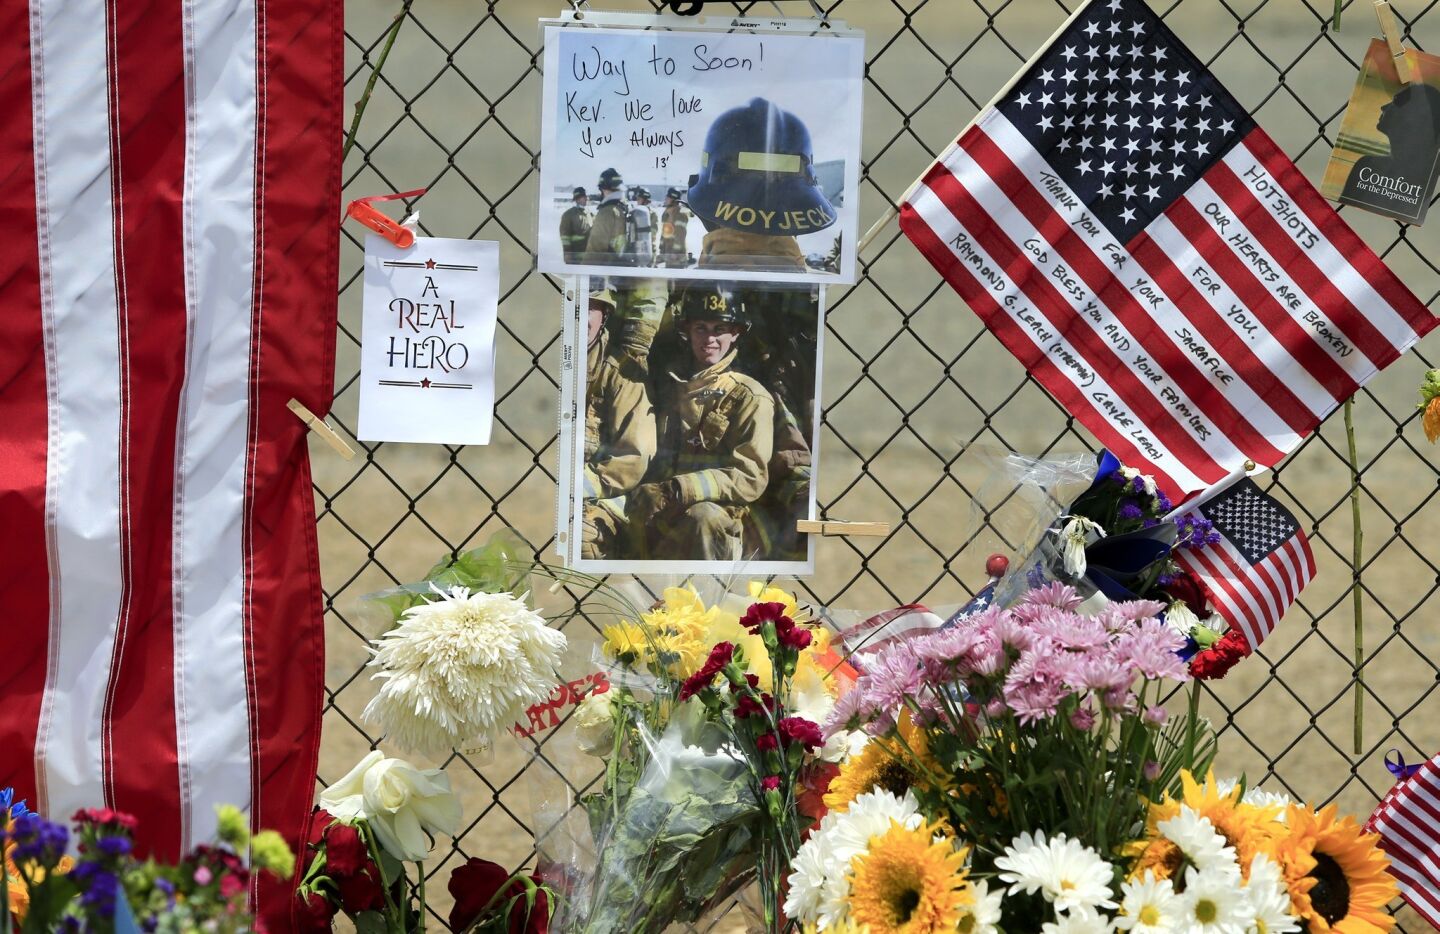 Firefighter Kevin Wyjeck is remembered with pictures on the fence surrounding Fire Station 7 in Prescott.